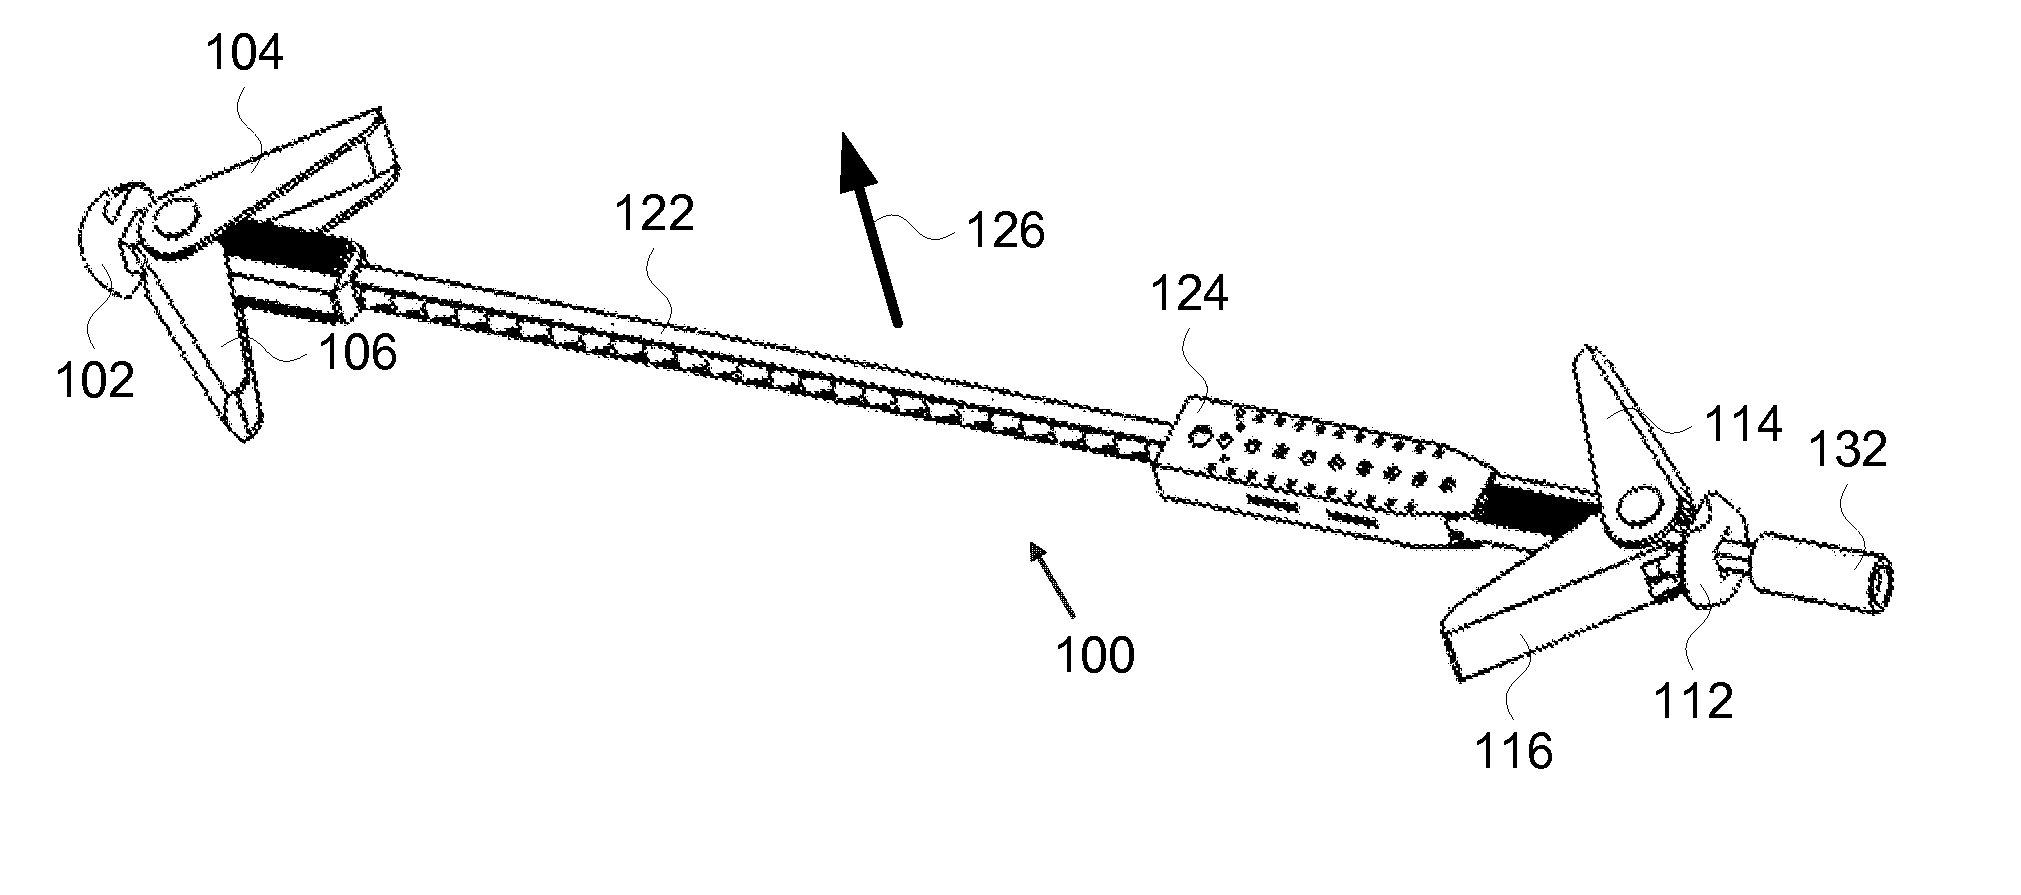 Microdevices for Tissue Approximation and Retention, Methods for Using, and Methods for Making